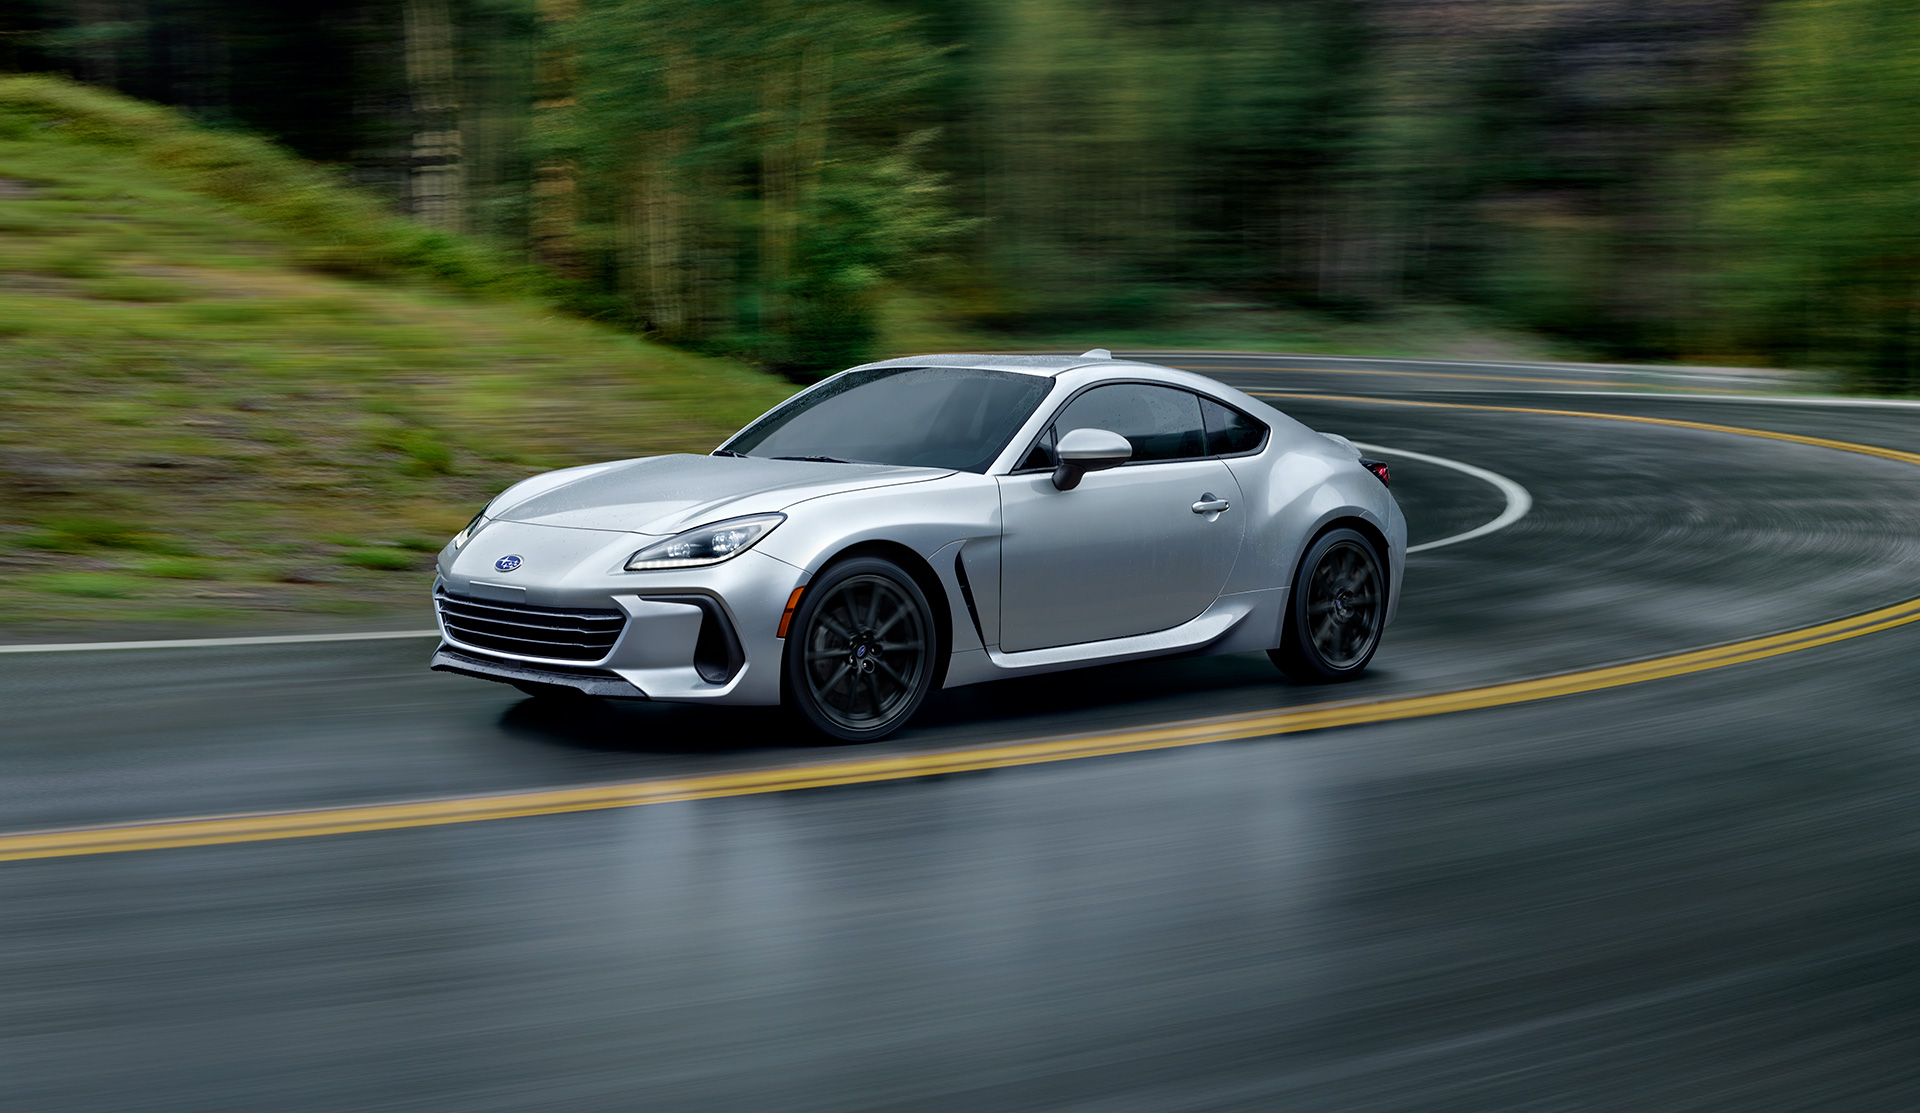 B2024 BRZ rounding the curve on a mountain road.